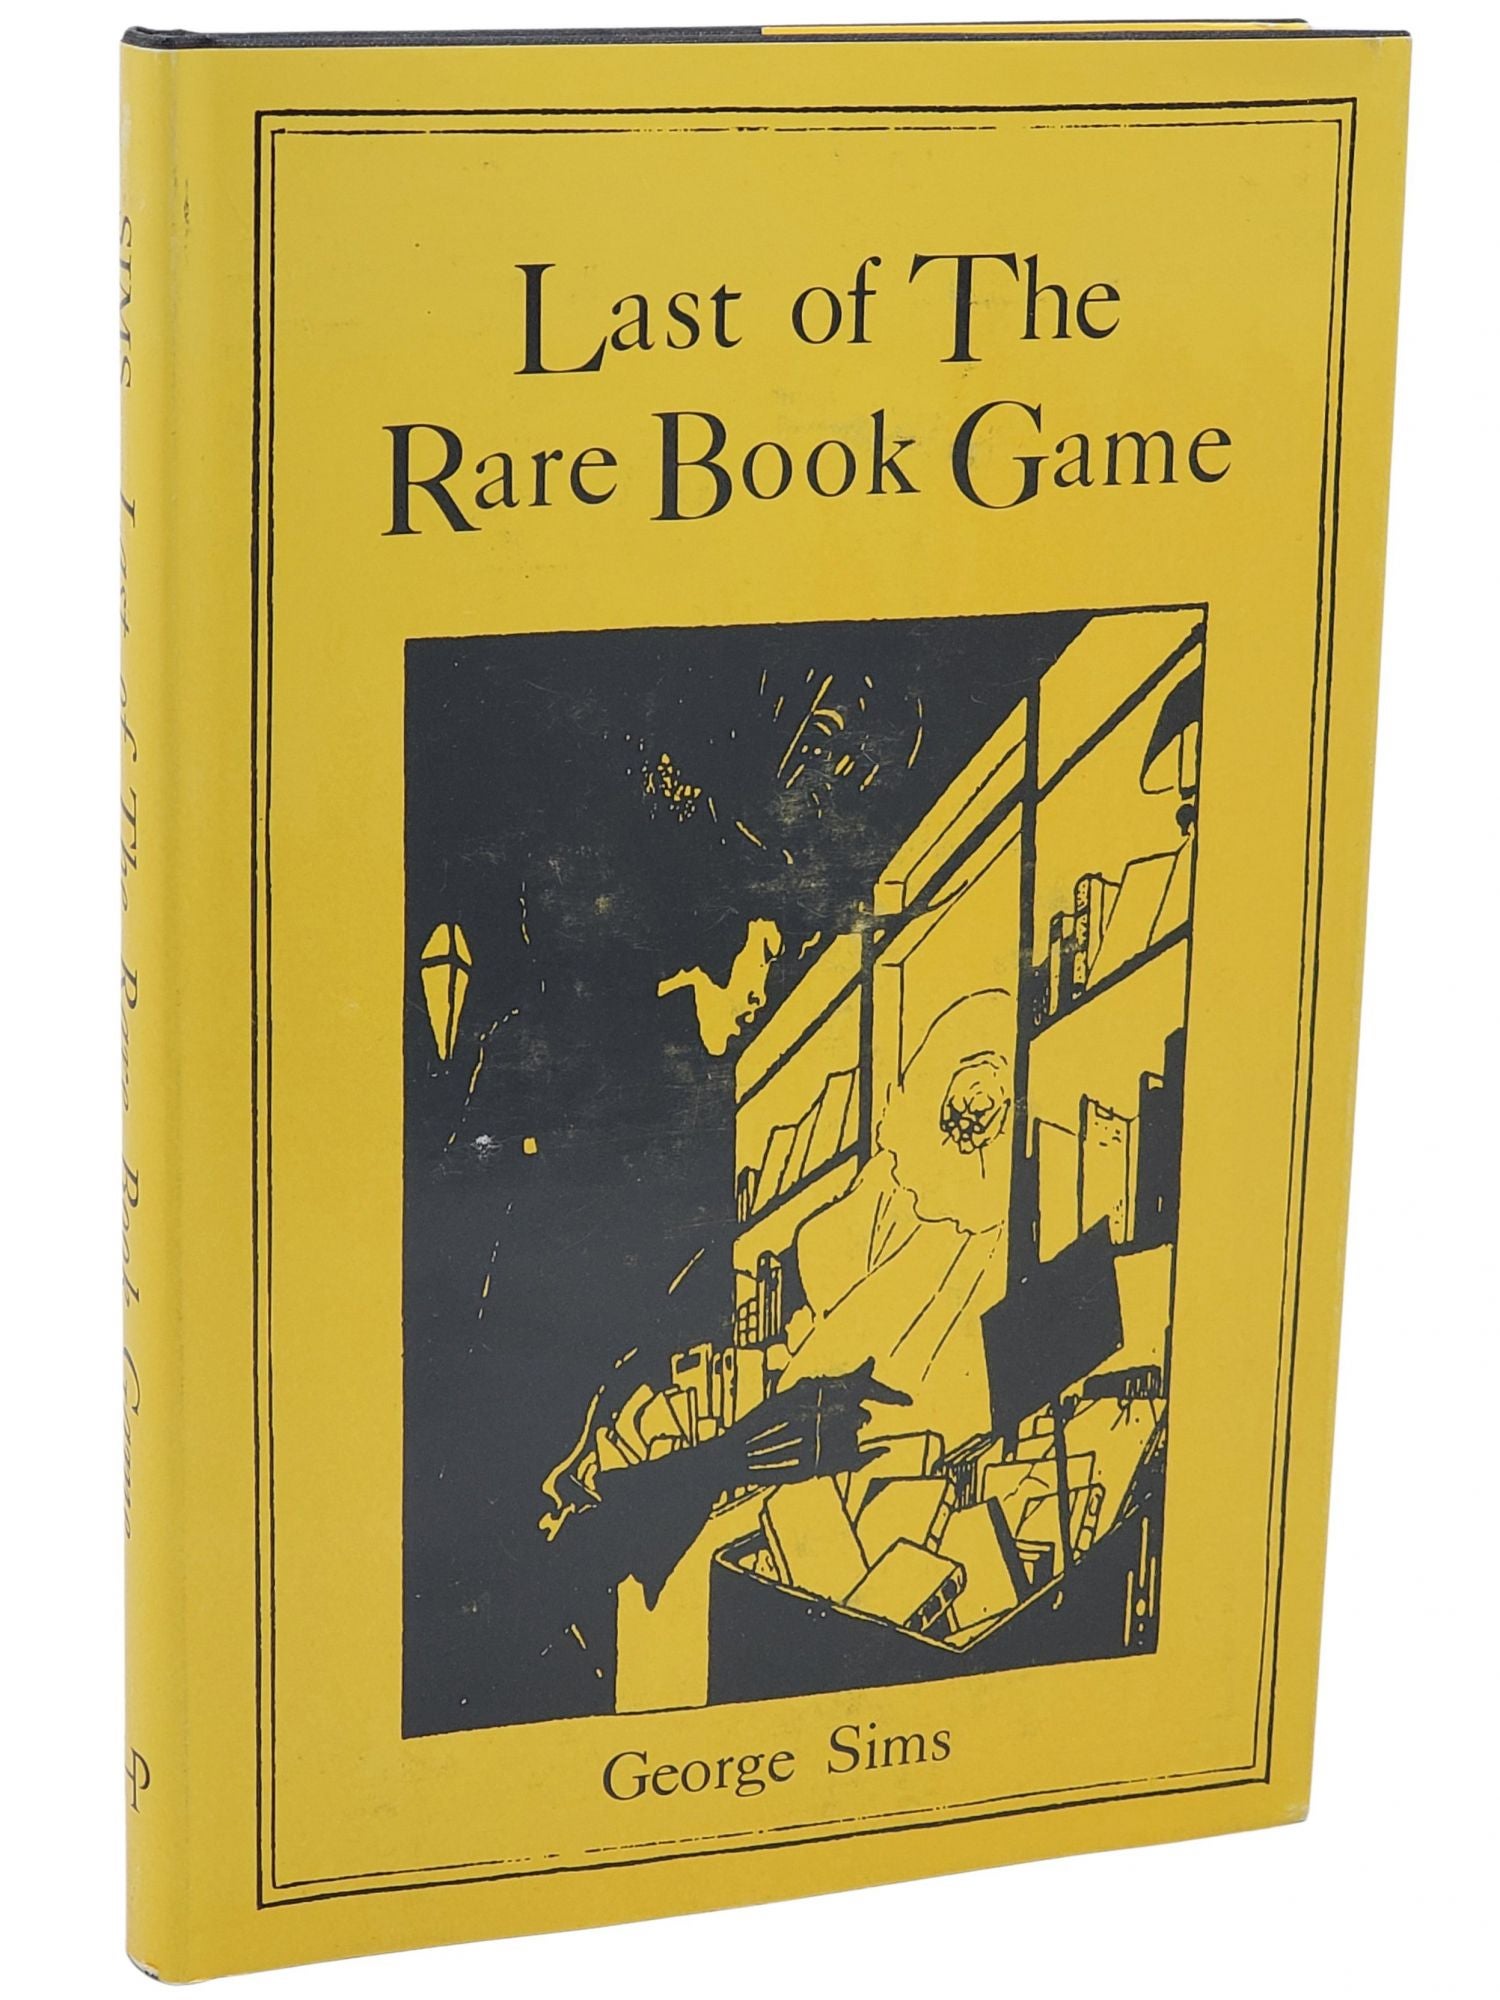 [Book #30026] LAST OF THE RARE BOOK GAME. George Sims.